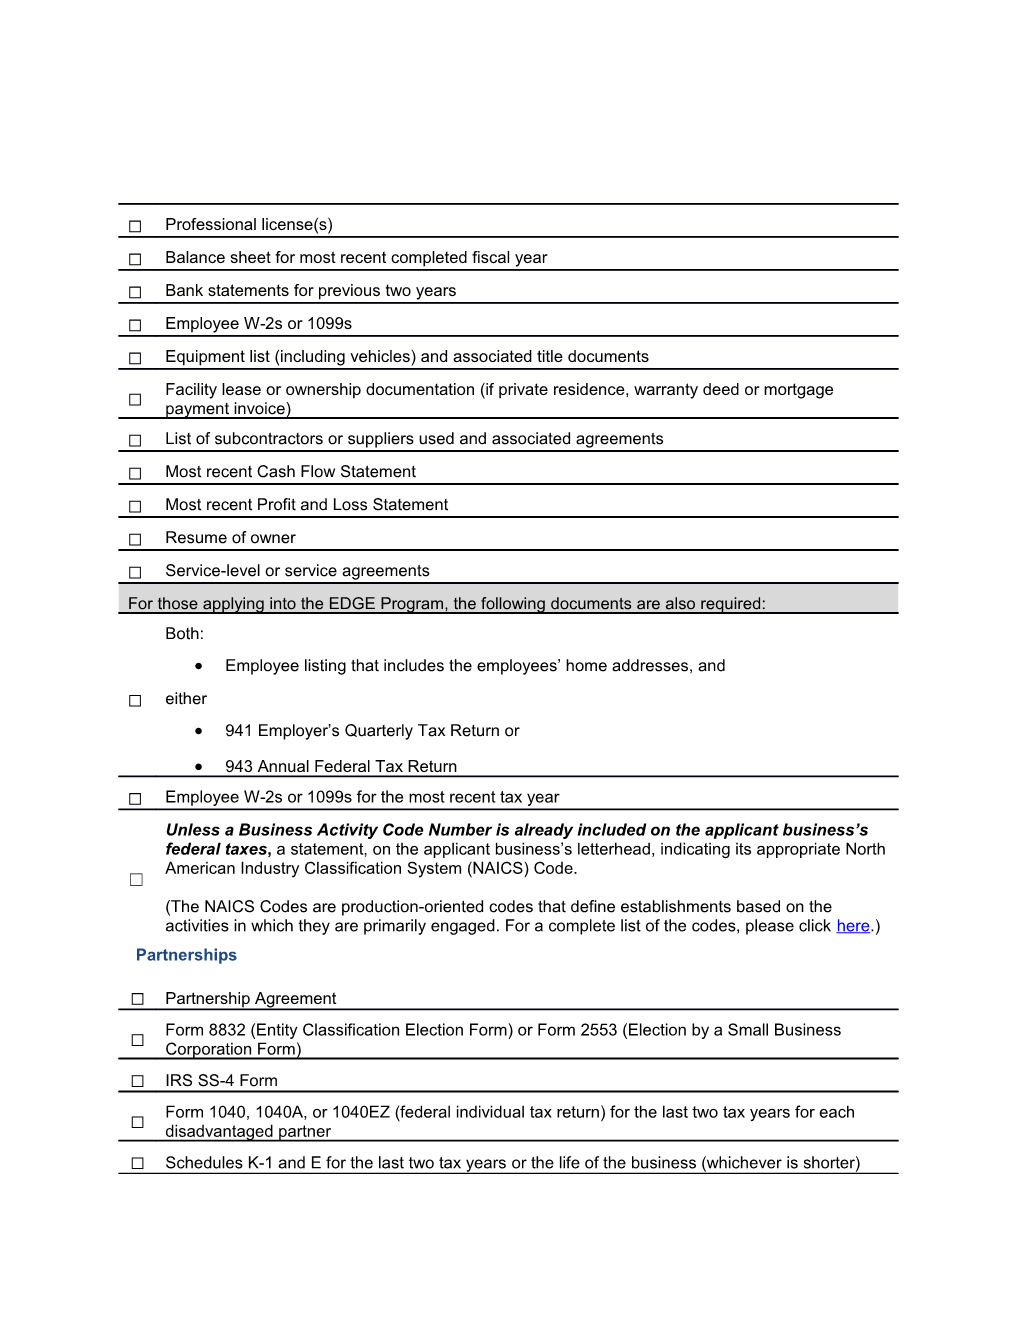 Supporting Document Checklist for The